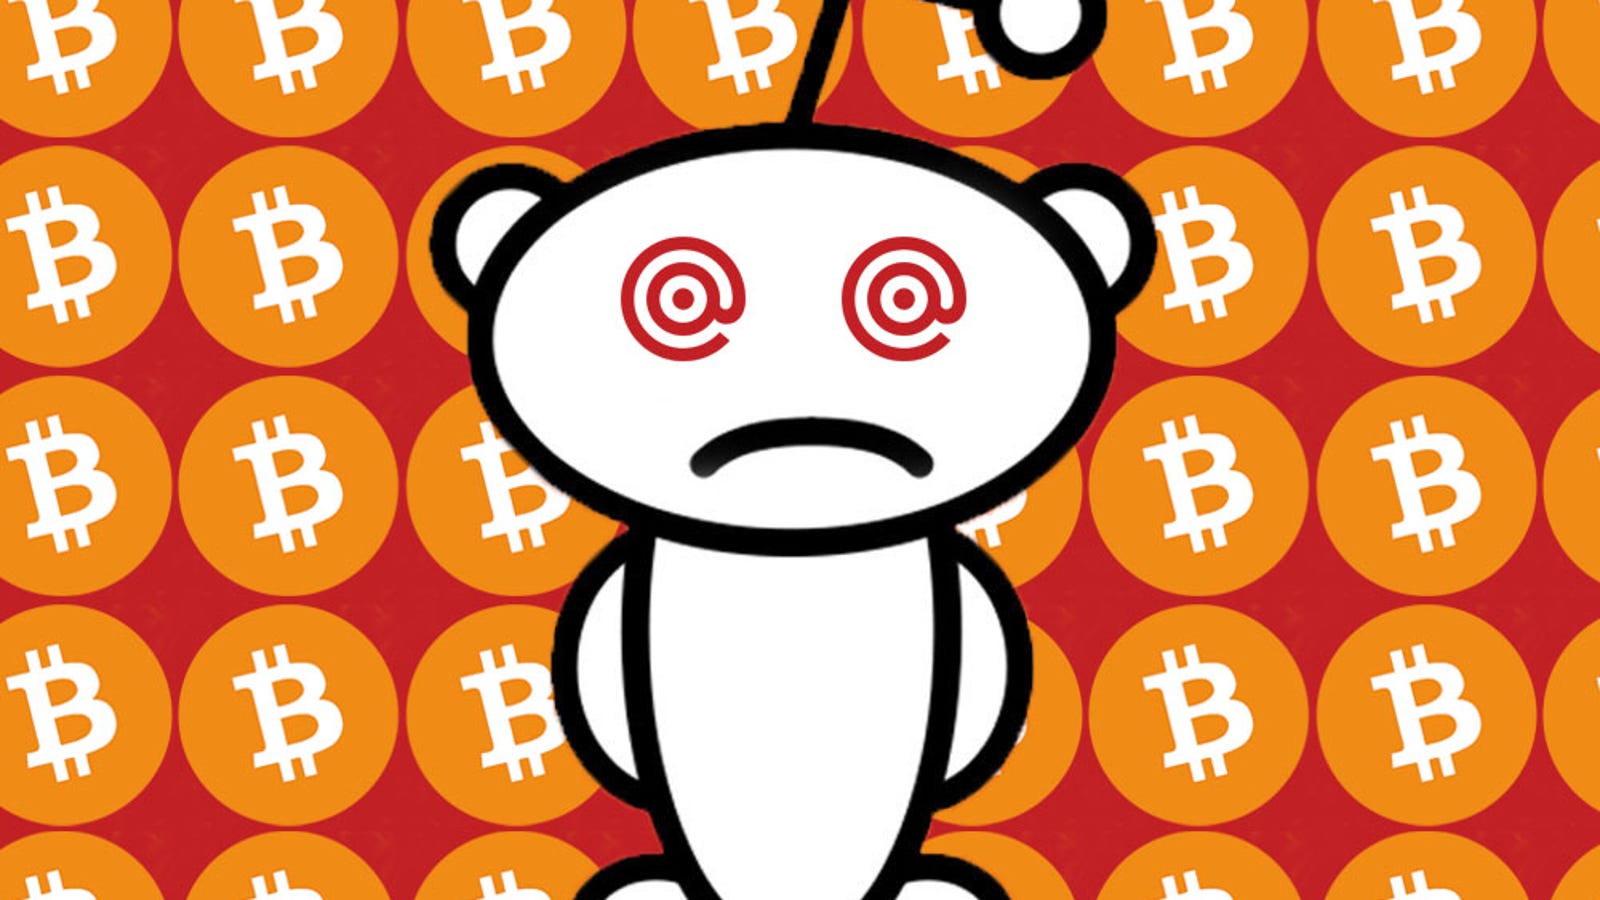 How to get into bitcoin reddit